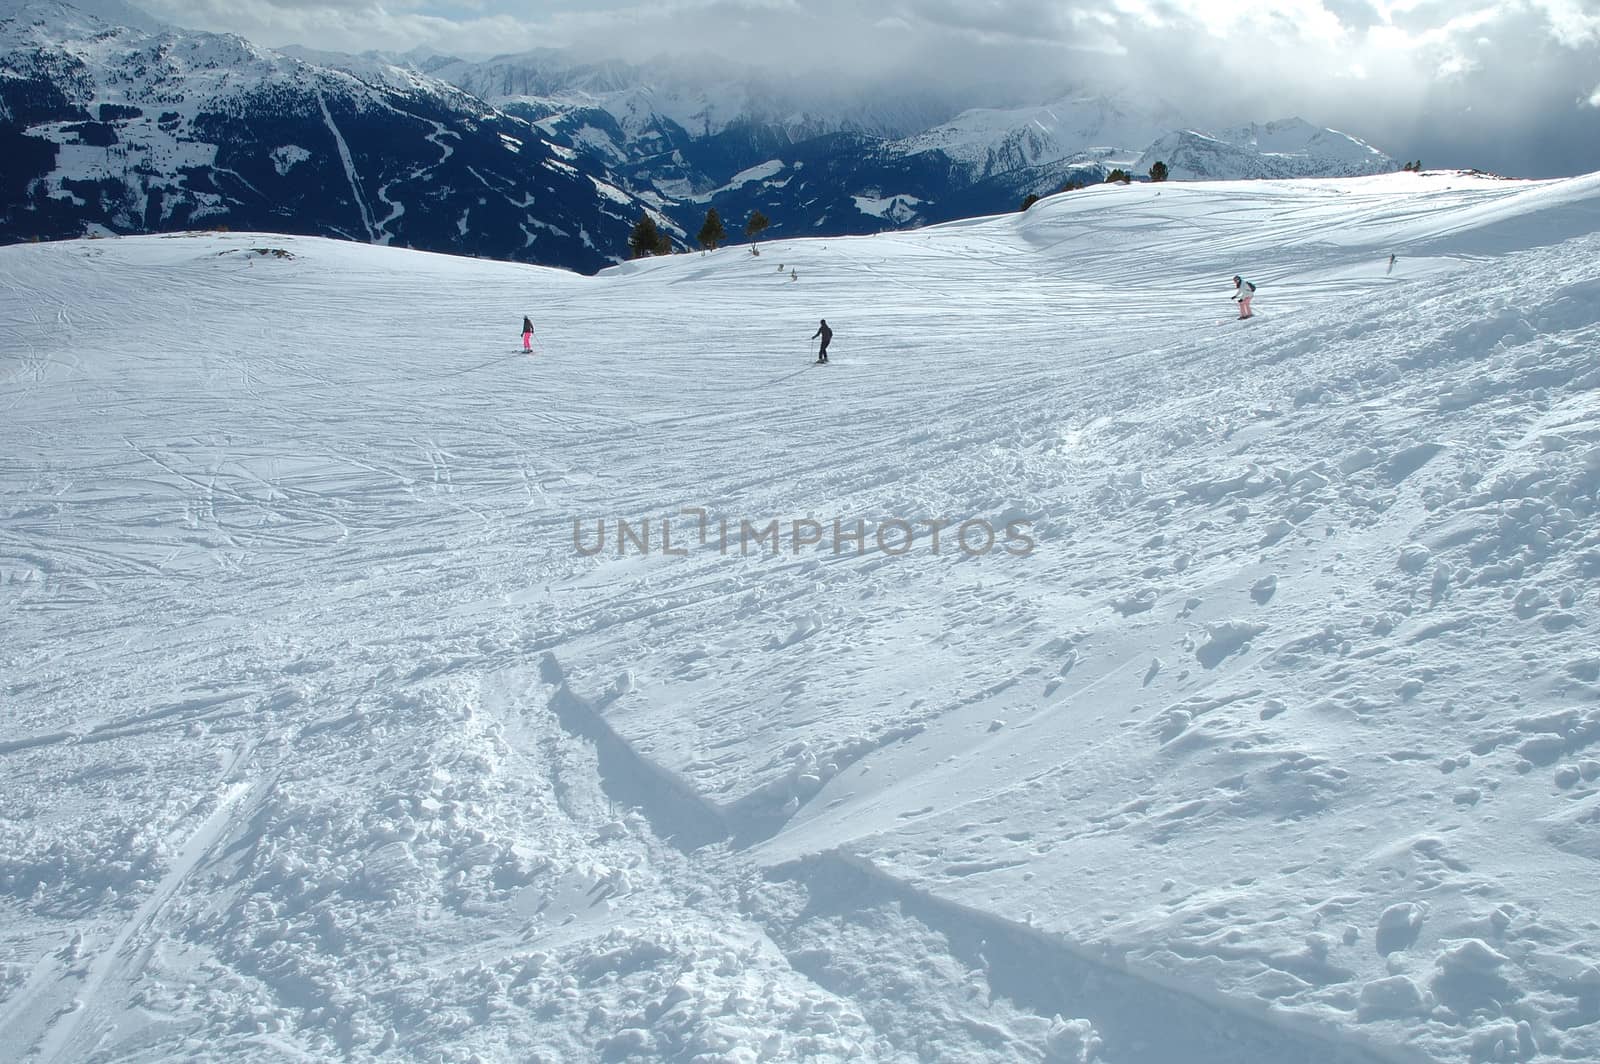 Ski slope and skiers in Austria nearby Kaltenbach in Zillertal valley